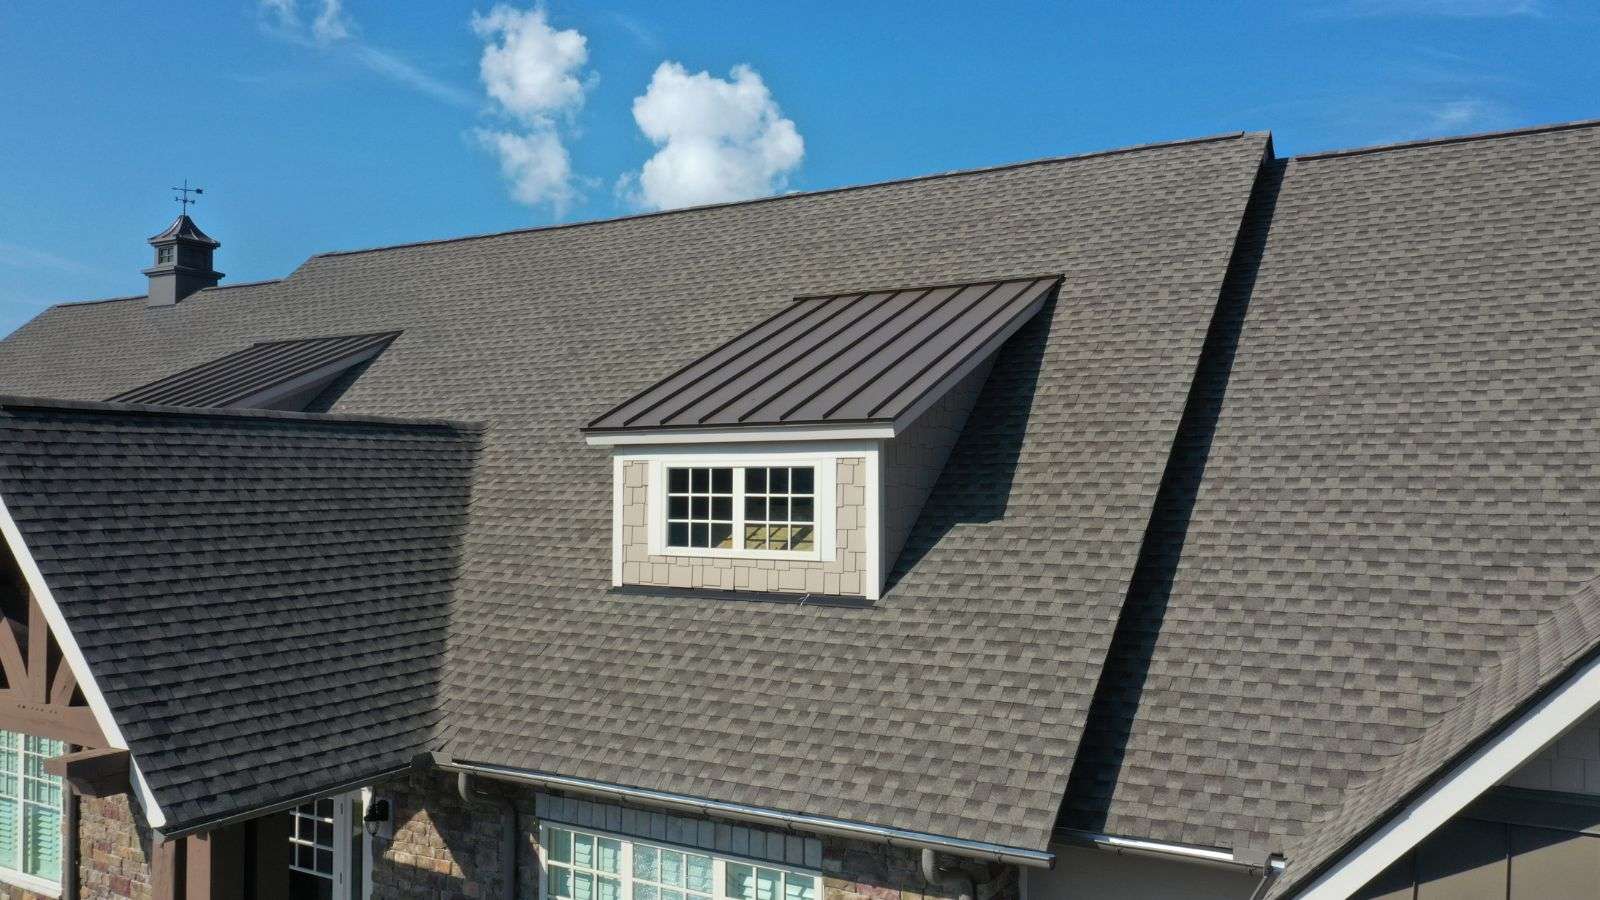 Prorate roof warranty - bighomeprojects.com